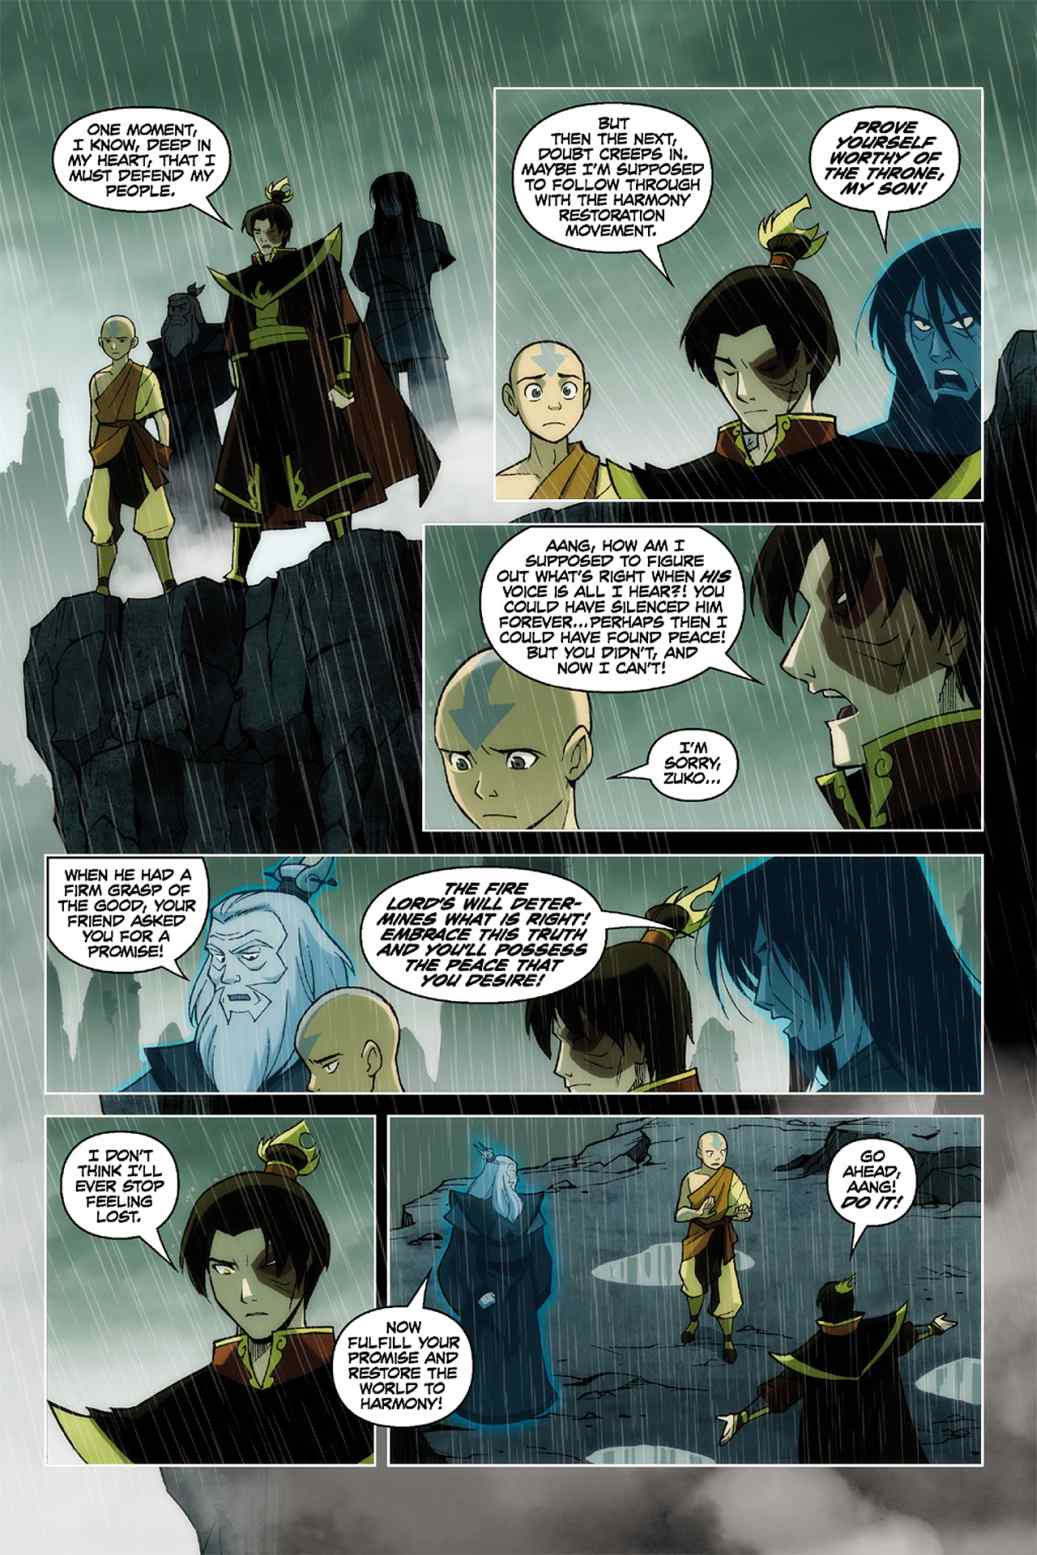 Read Comics Online Free - Avatar The Last Airbender Comic Book Issue #003 -  Page 40